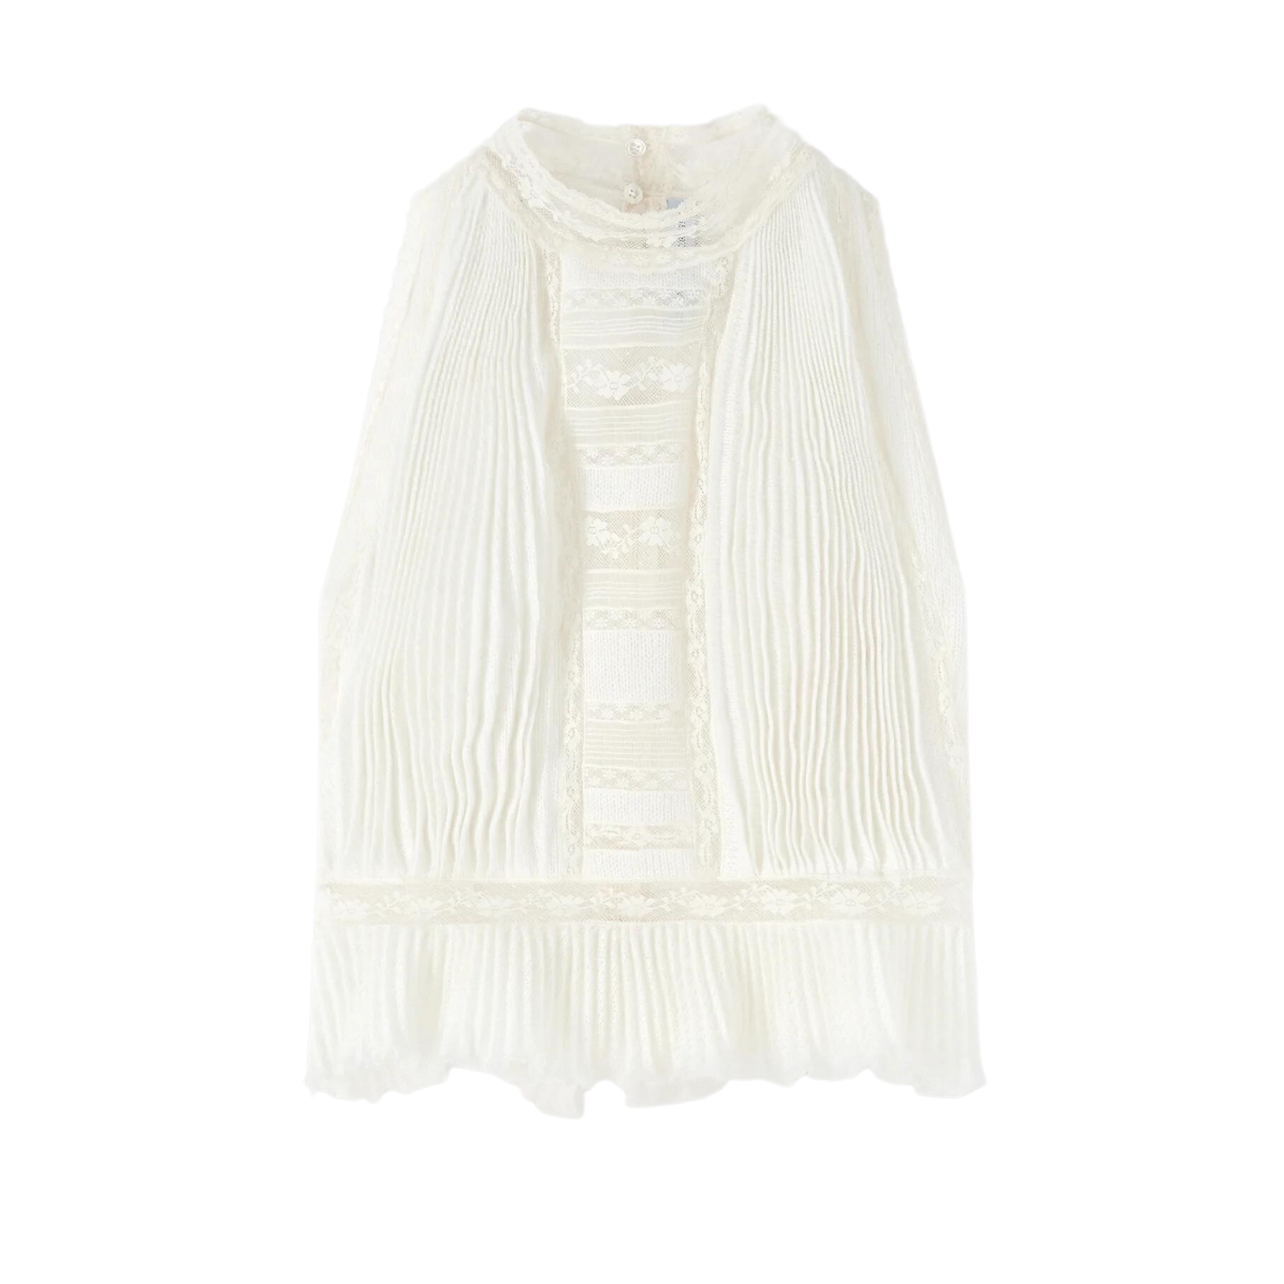 Pair it with a flowy skirt or light-weight pants now and wear it with jeans later. Embellished with tone-on-tone Valenciennes lace inlays and made with a mohair-blend knit, Ermanno Scervino’s sleeveless embroidery shirt has the ease of a basic white tee, but the elegance of a blouse. Style it with something white on the bottom and transition this piece from business chic to white party ready.